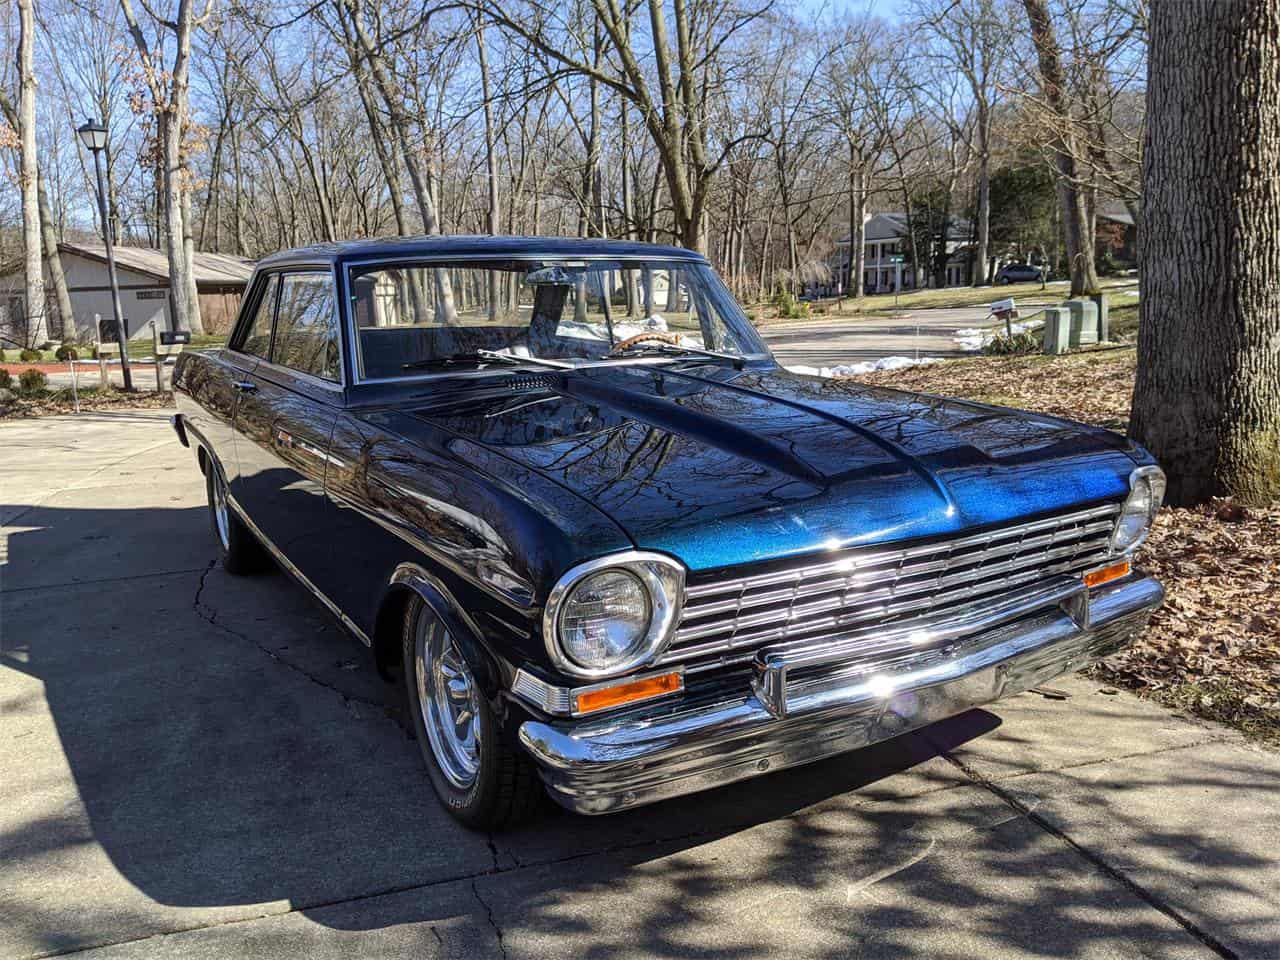 featured listing color me wild 1963 chevy ll nova ss classiccars com journal wild 1963 chevy ll nova ss